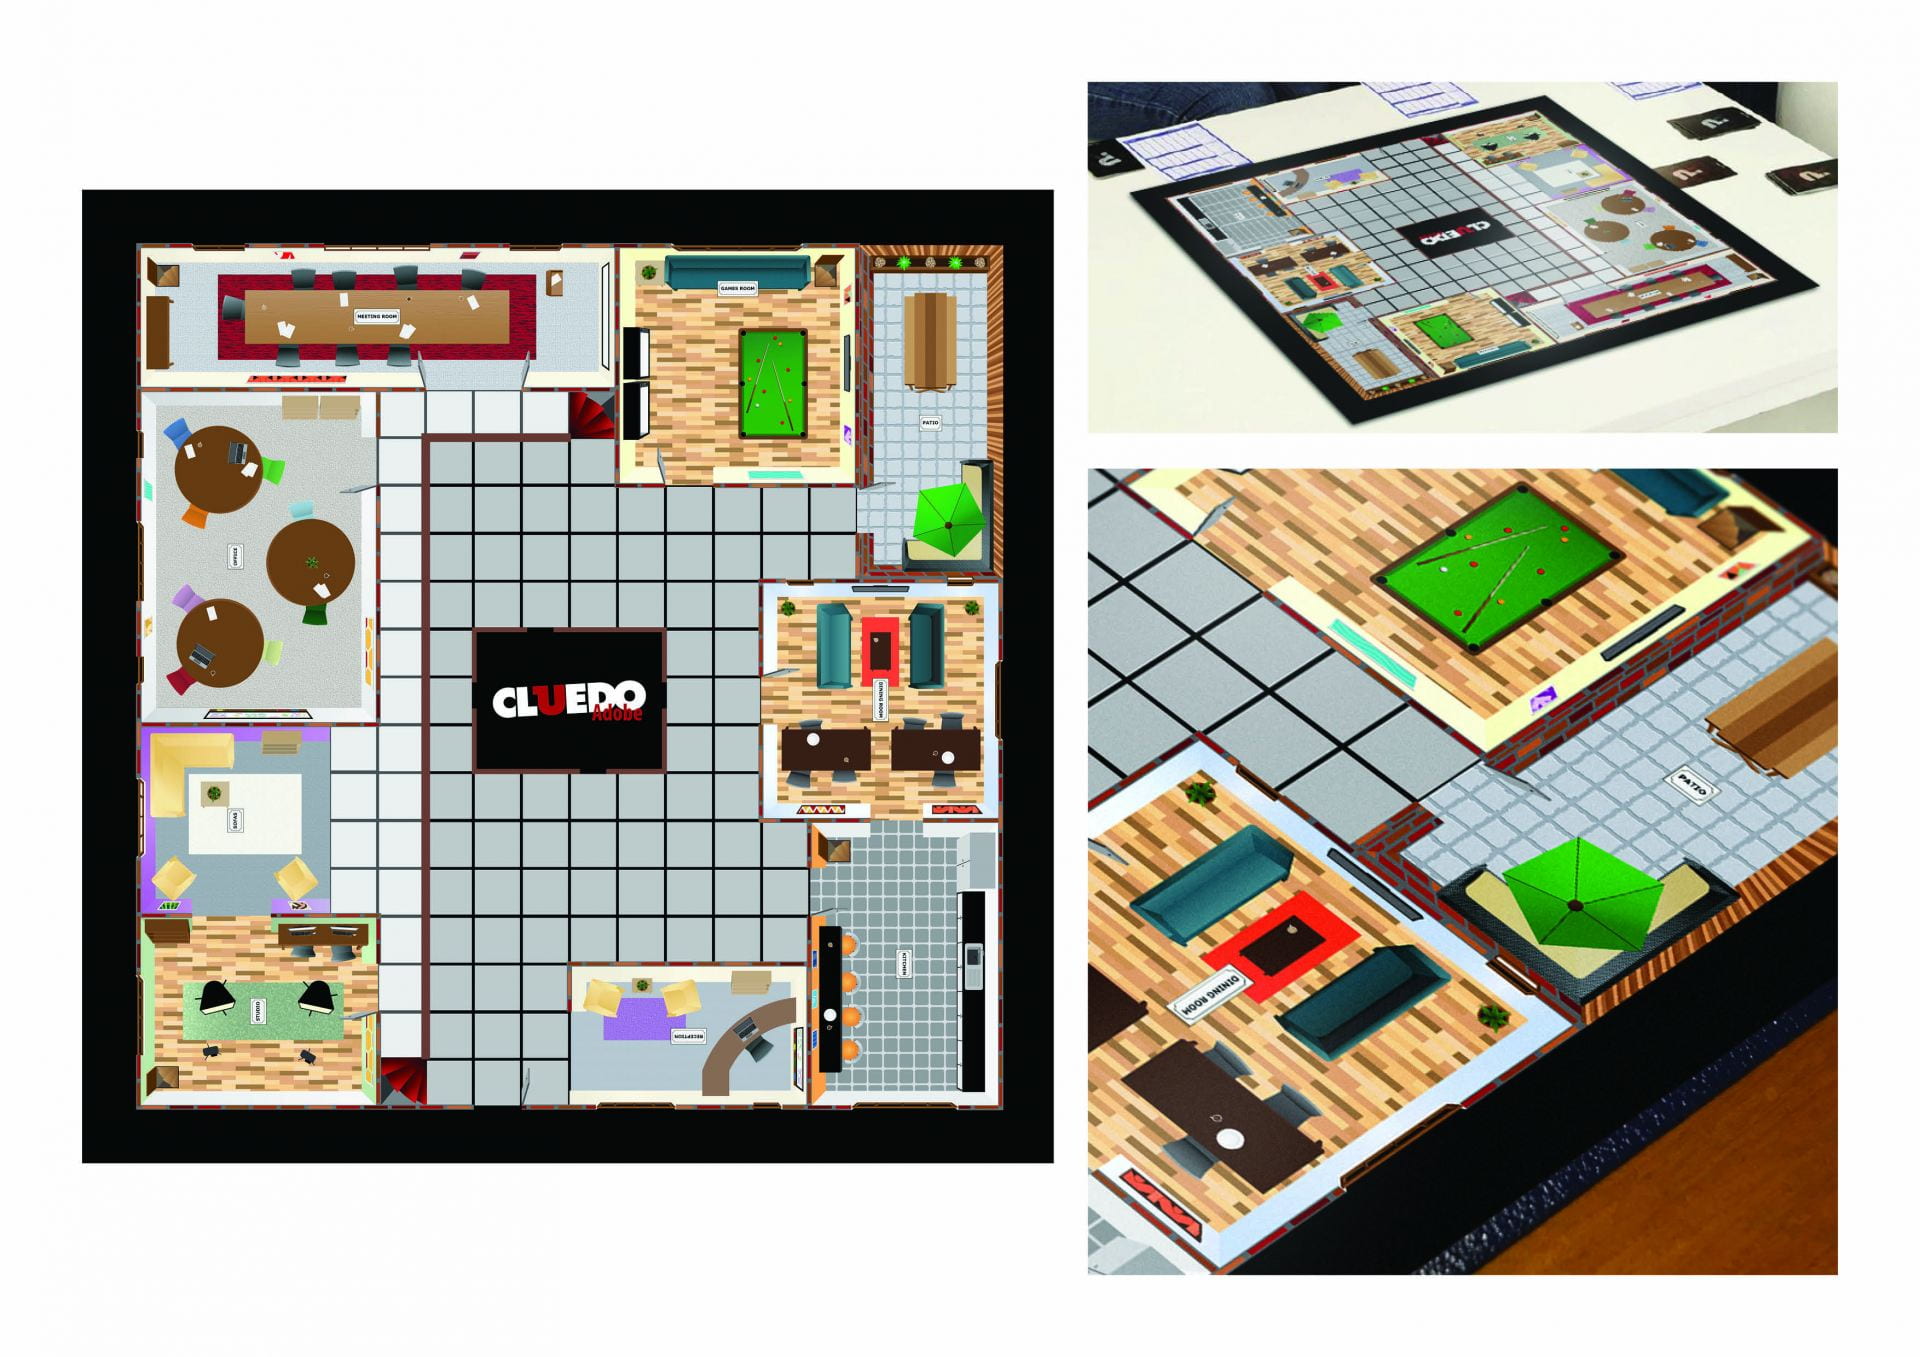 Adobe version of the board game Cluedo set in an office building environment.